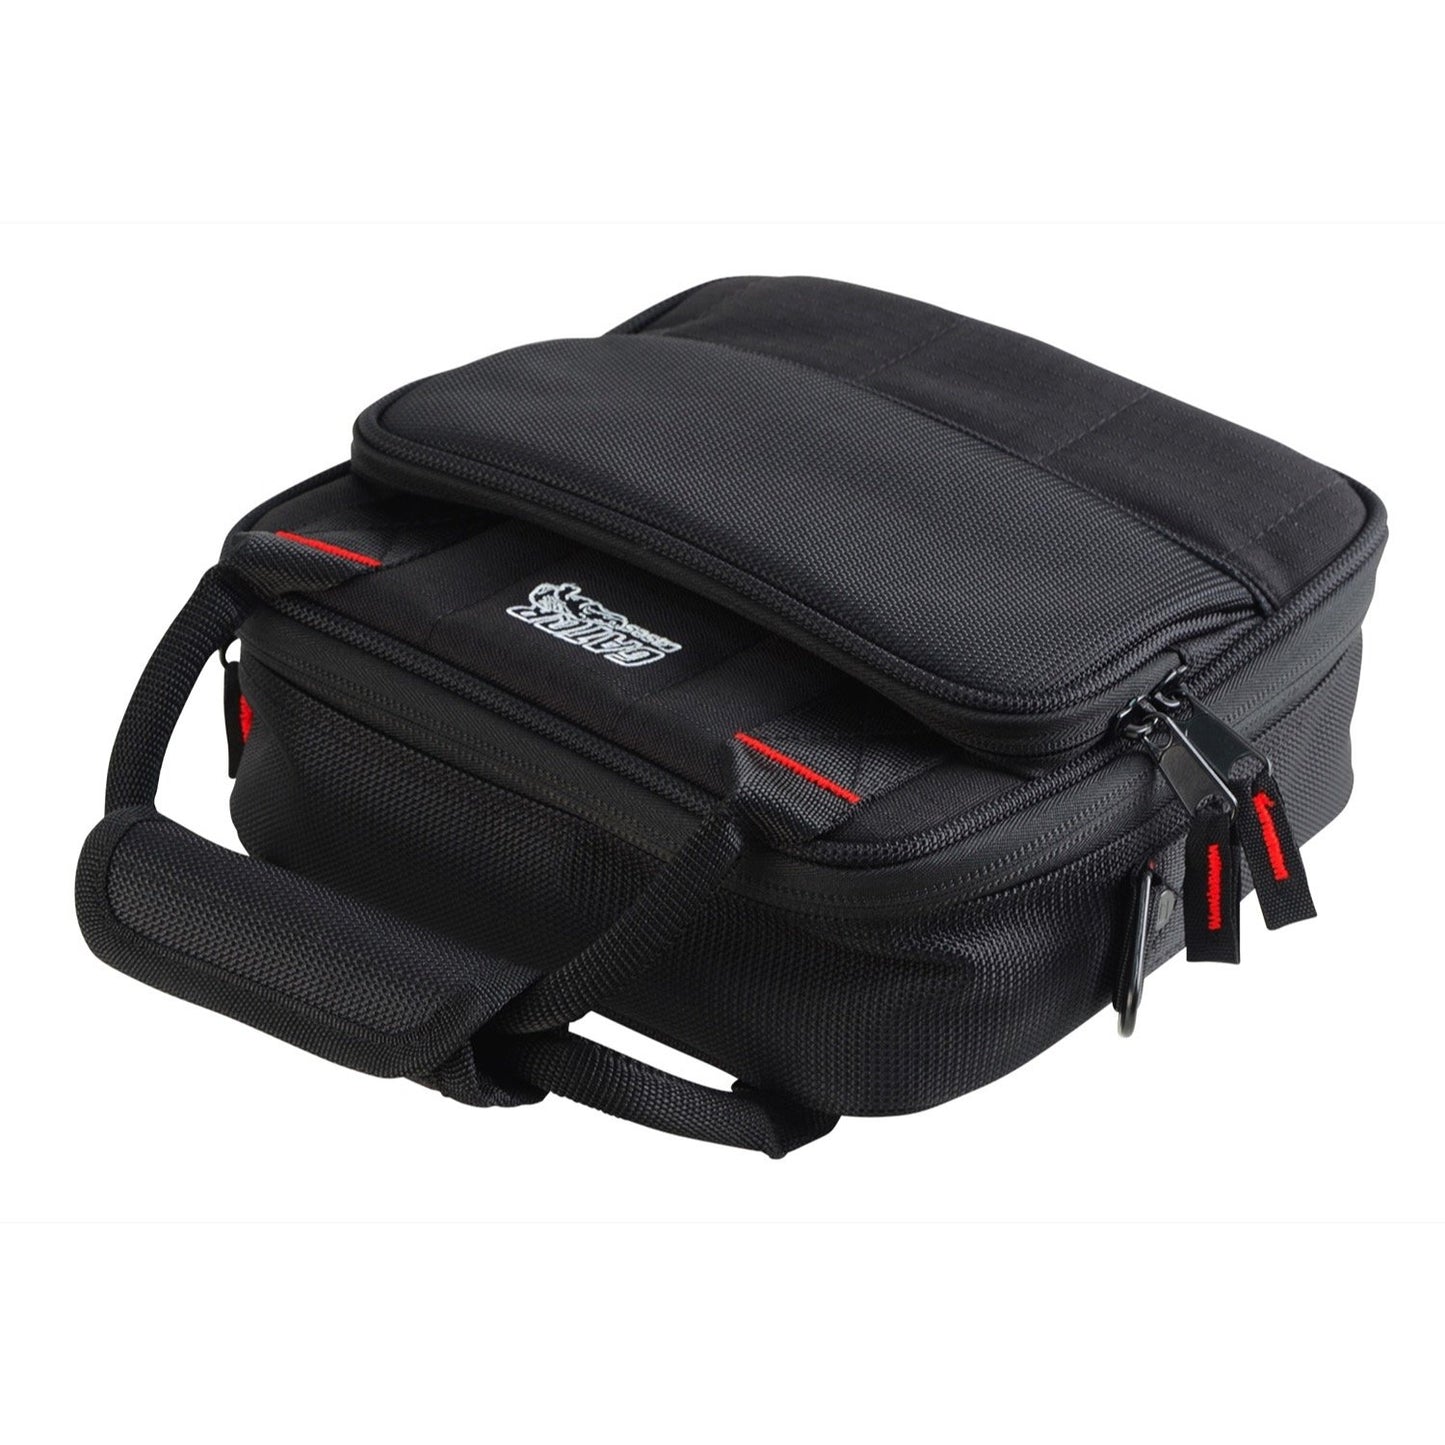 Gator G-MIXERBAG Padded Mixer and Equipment Bag, 9 x 9 x 2.75 in.